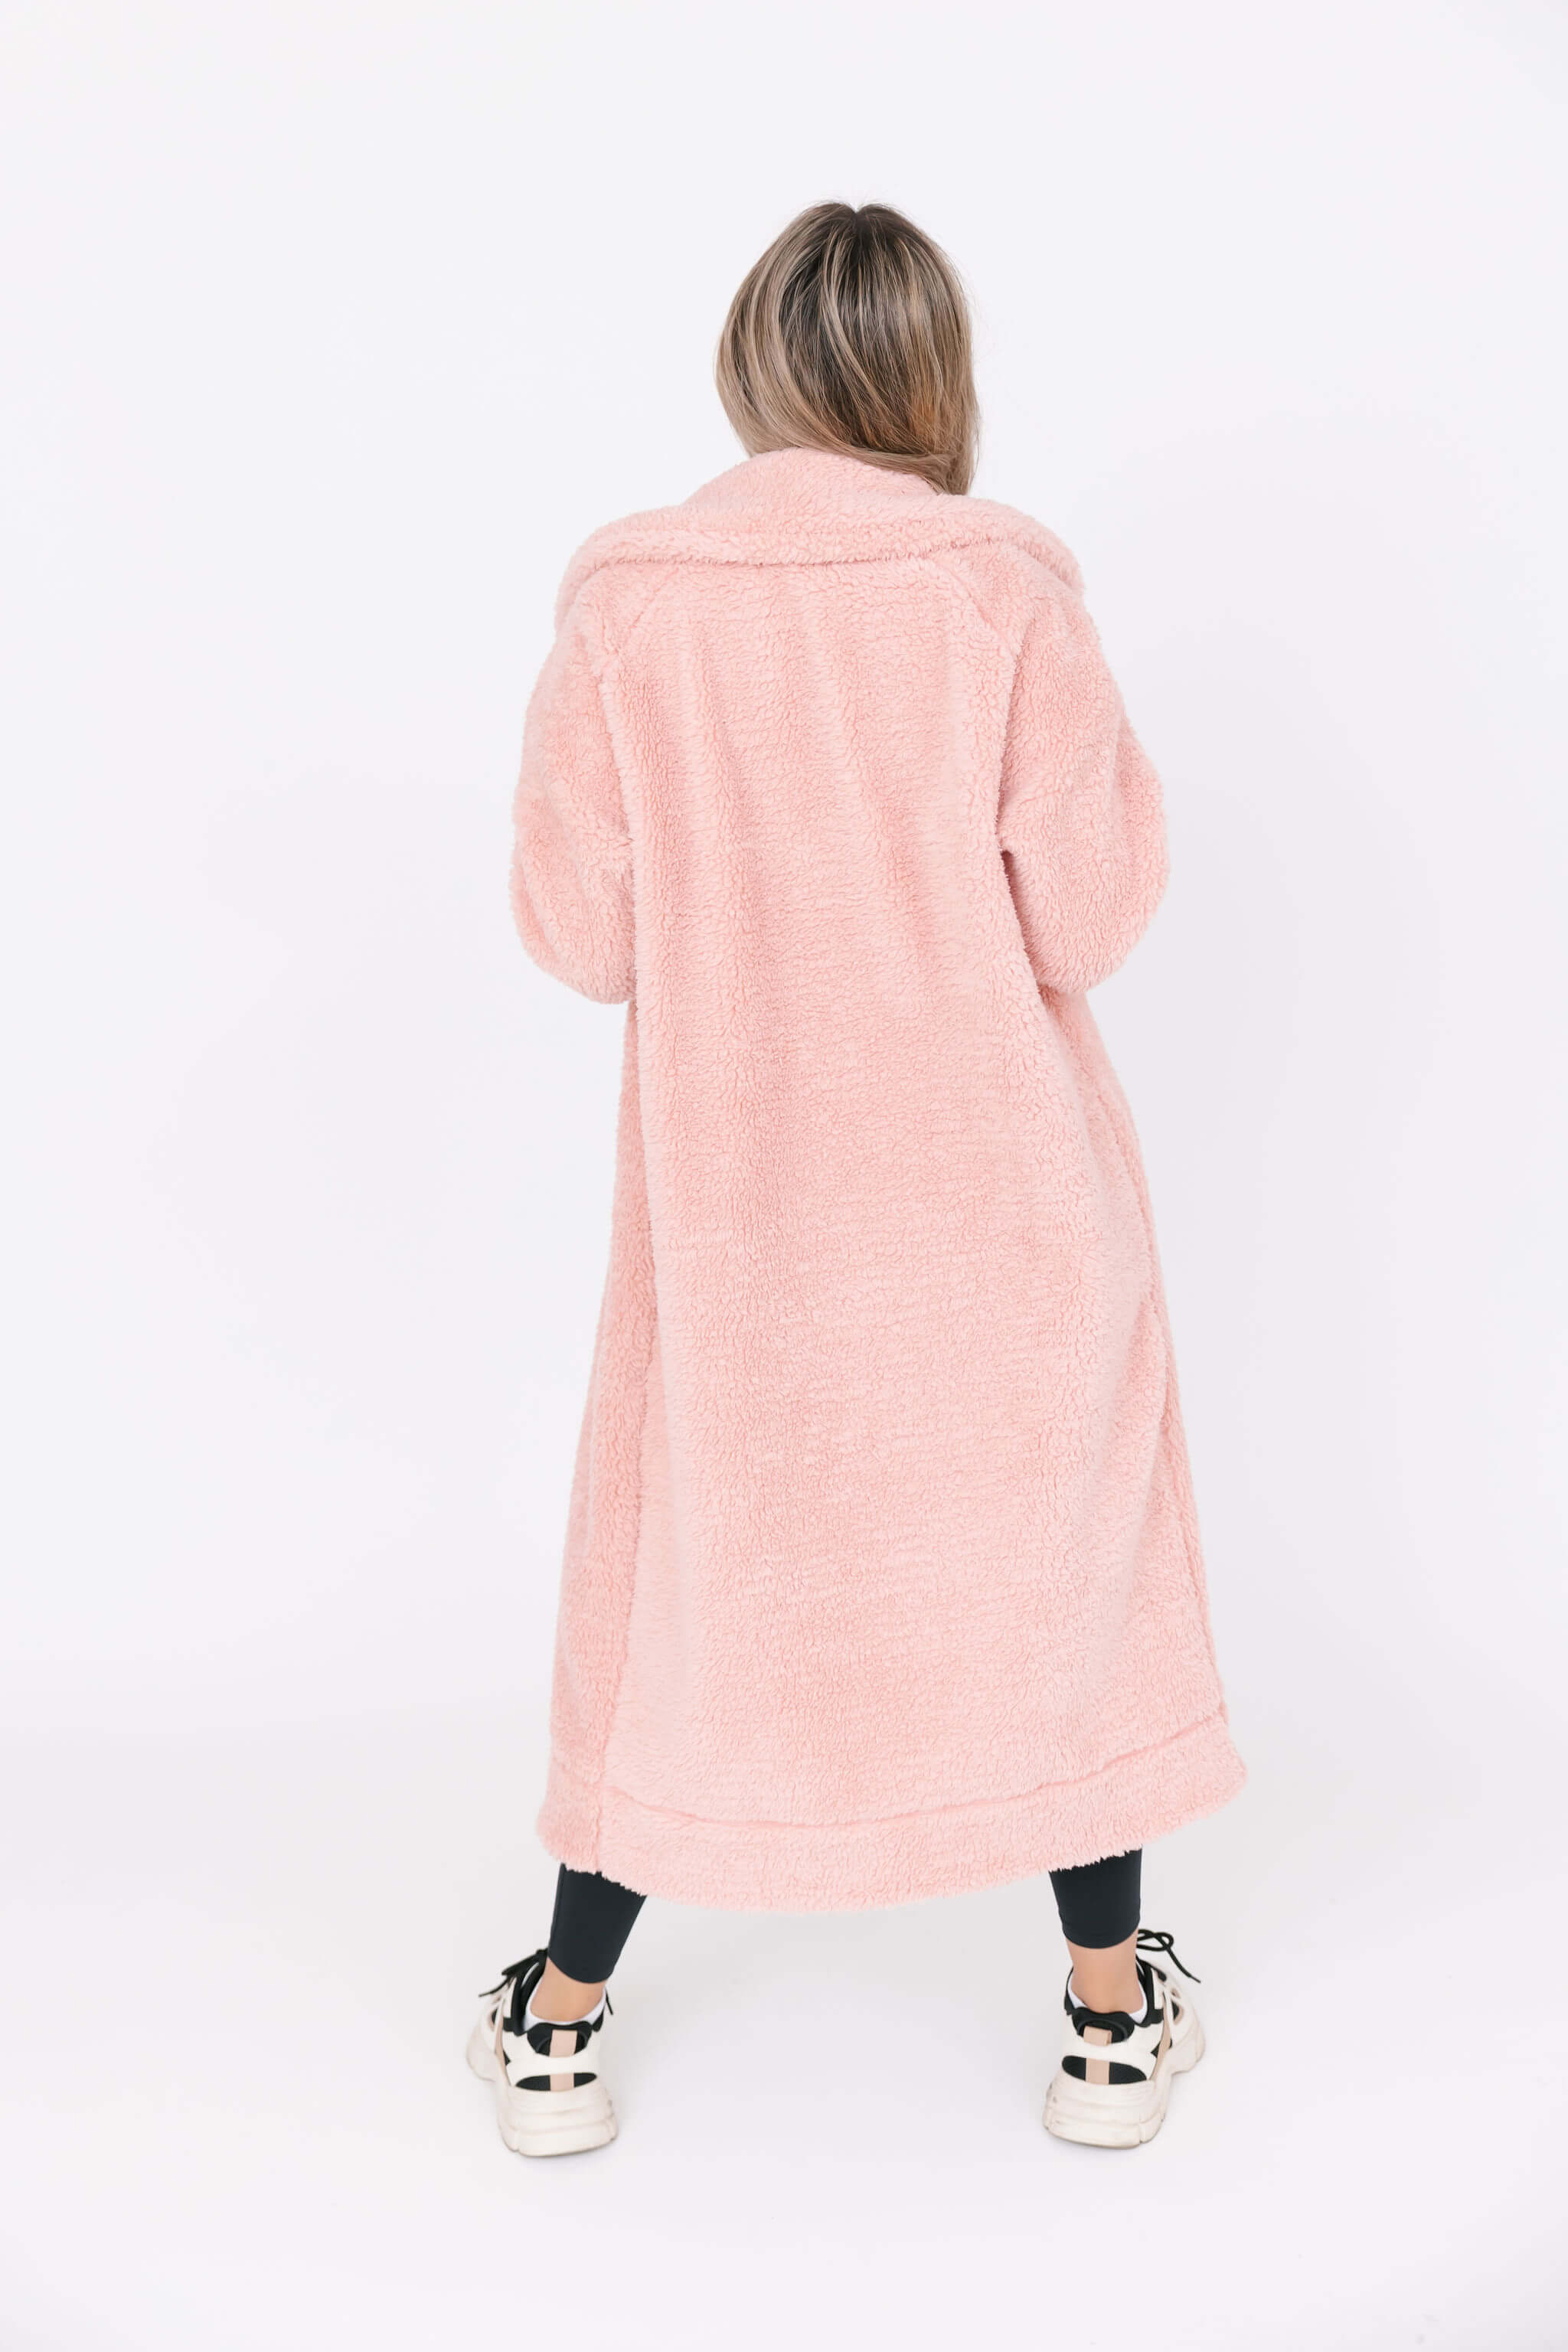 Smash + Tess and Kaitlyn Bristowe Cozy Chic Teddy Coat in Rosé Pink